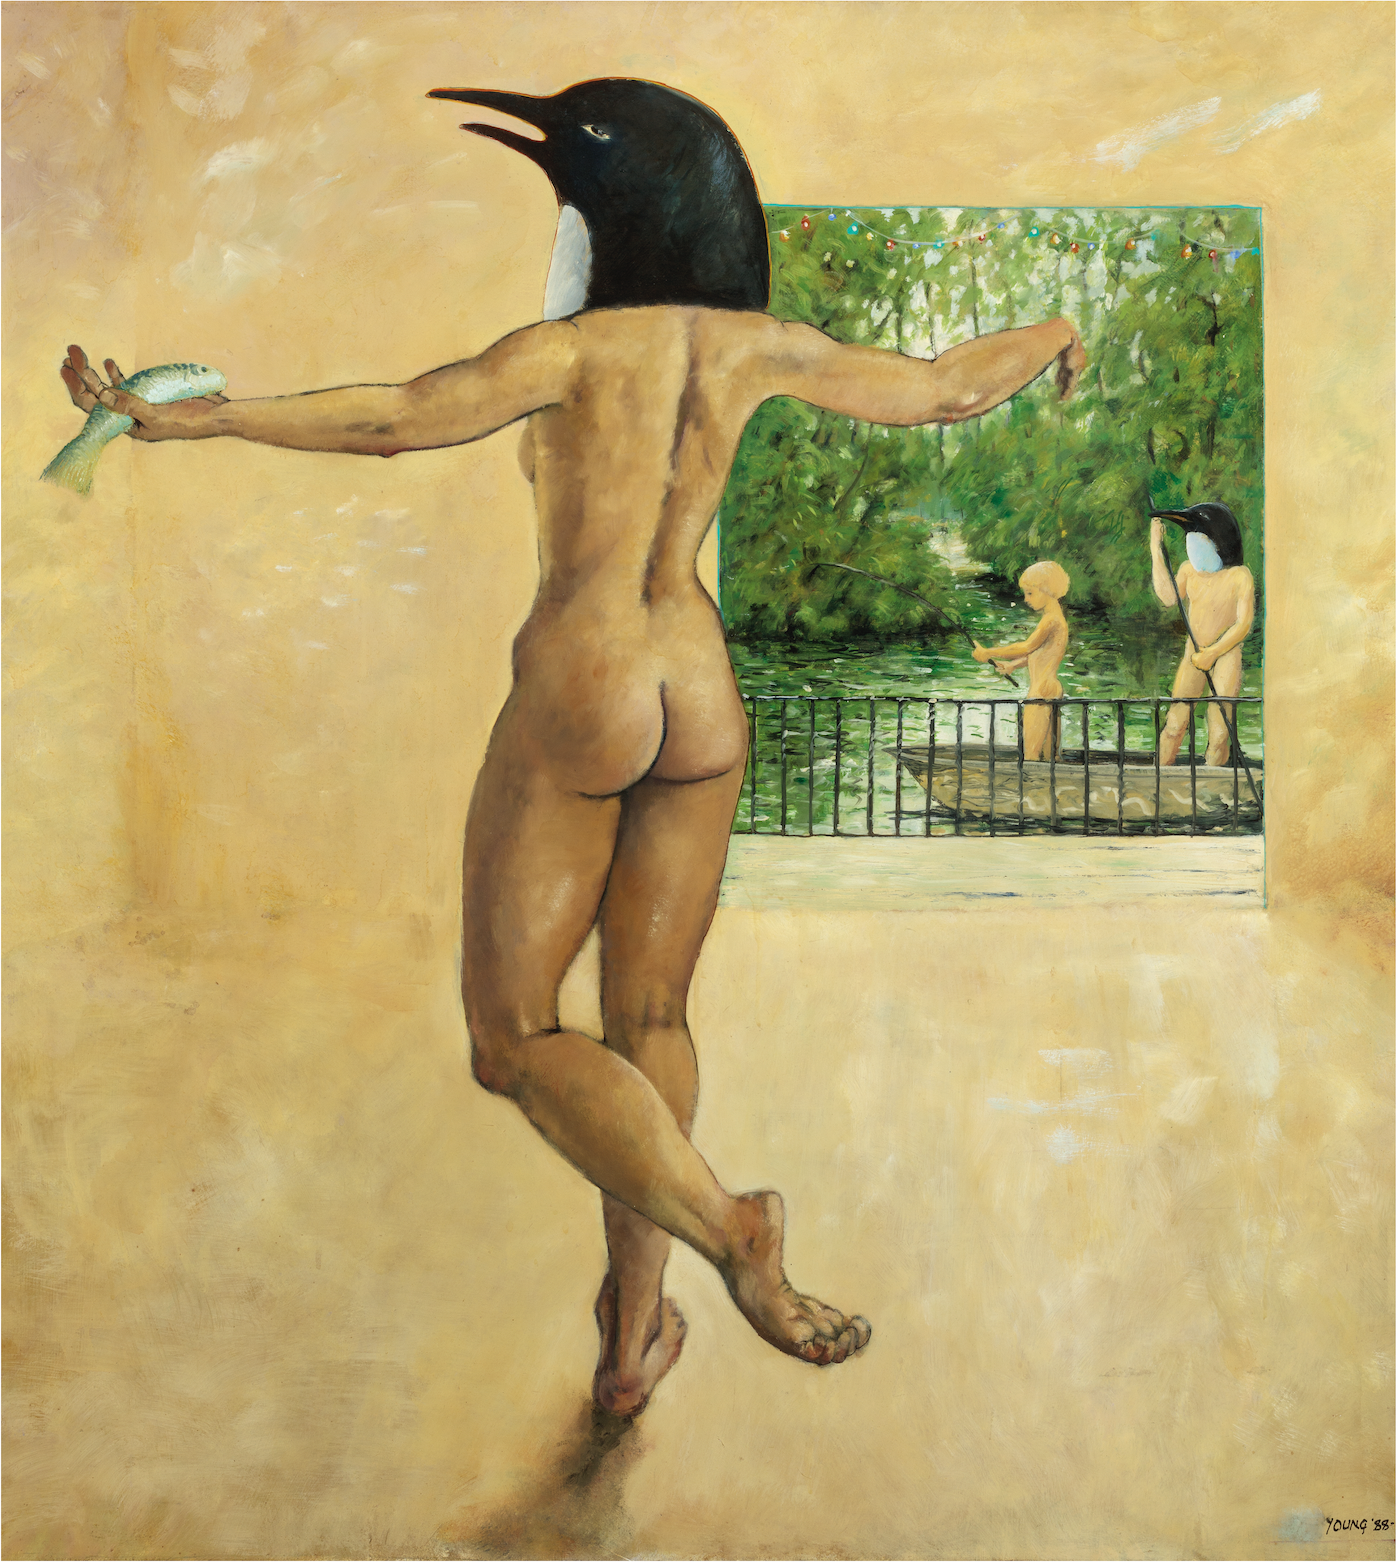 Dancer with Fish (1987)